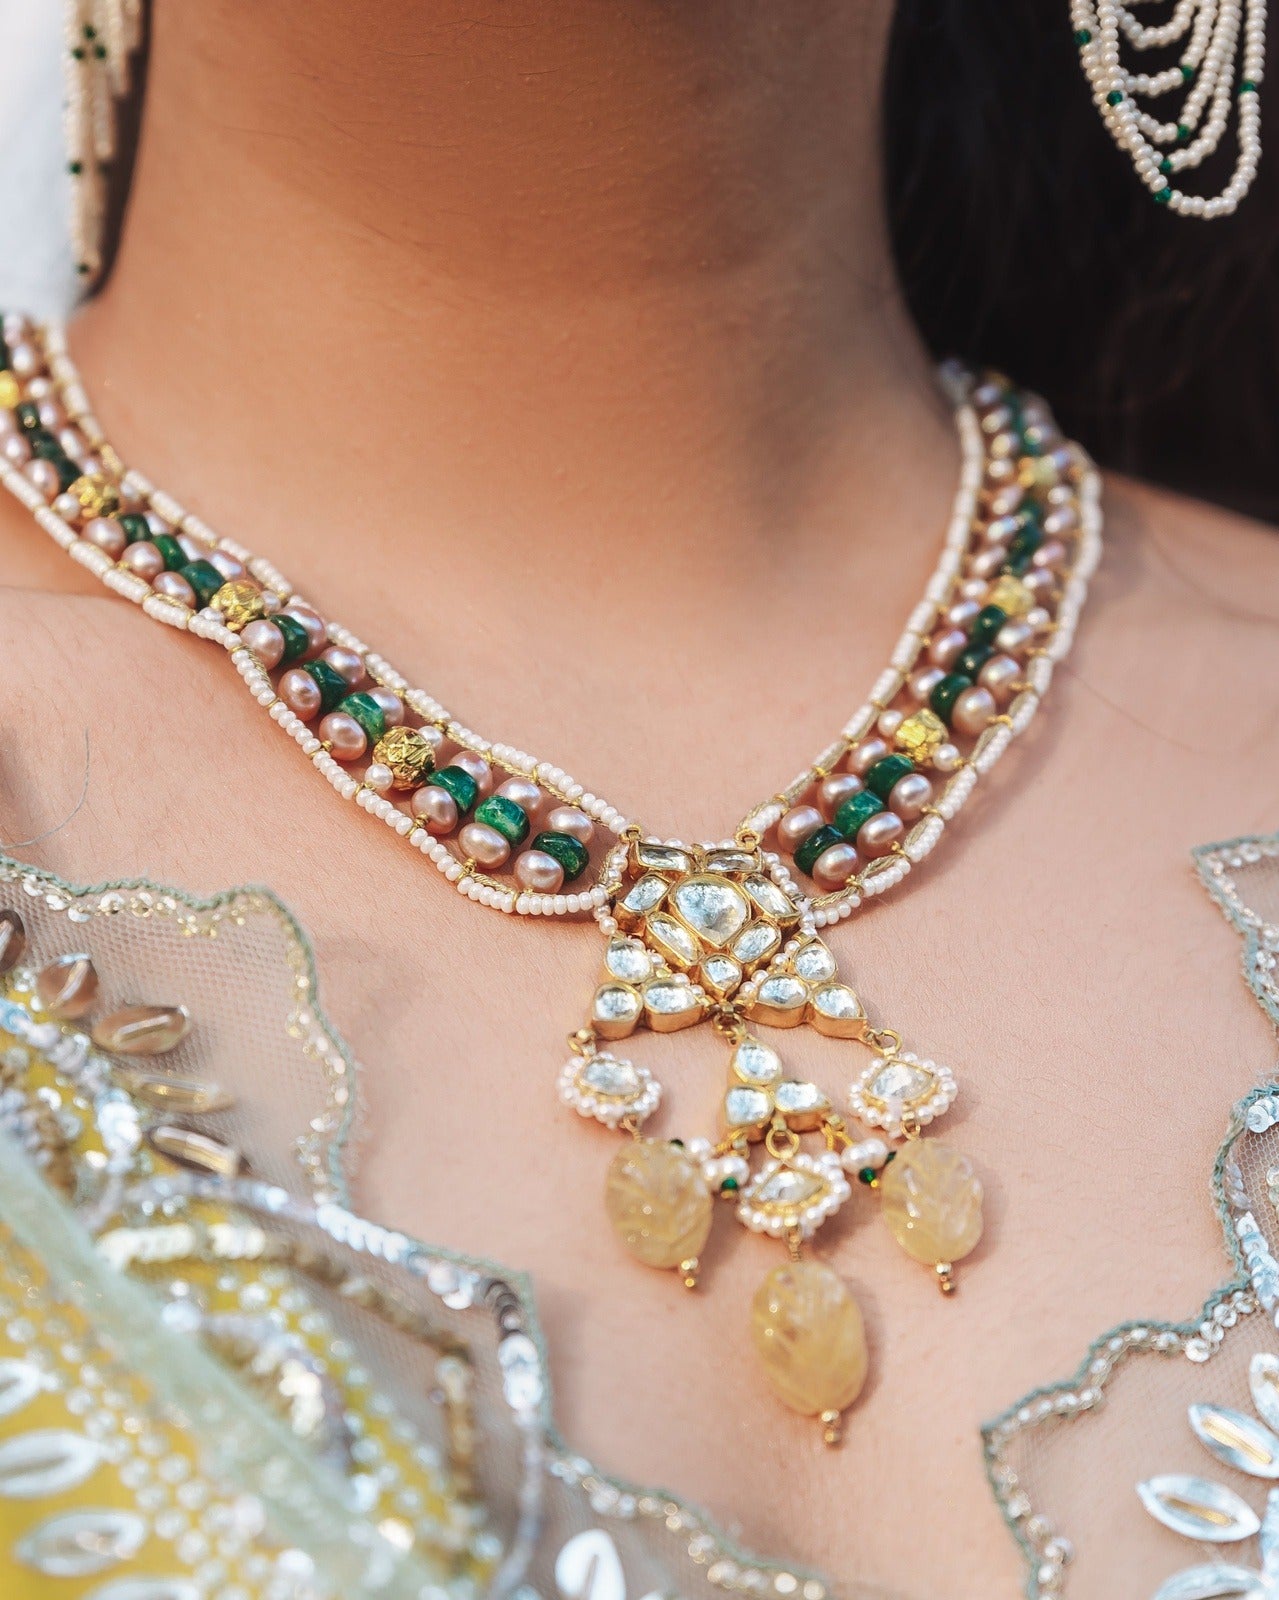 White Necklace Niseni Polki Citrine at Kamakhyaa by House Of Heer. This item is Add Ons, Festive Jewellery, Festive Wear, Free Size, Gemstone, jewelry, Jewelry Sets, July Sale, July Sale 2023, Mix metal, Multicolor, Natural, Pearl, Polkis, Textured, Wedding Gifts